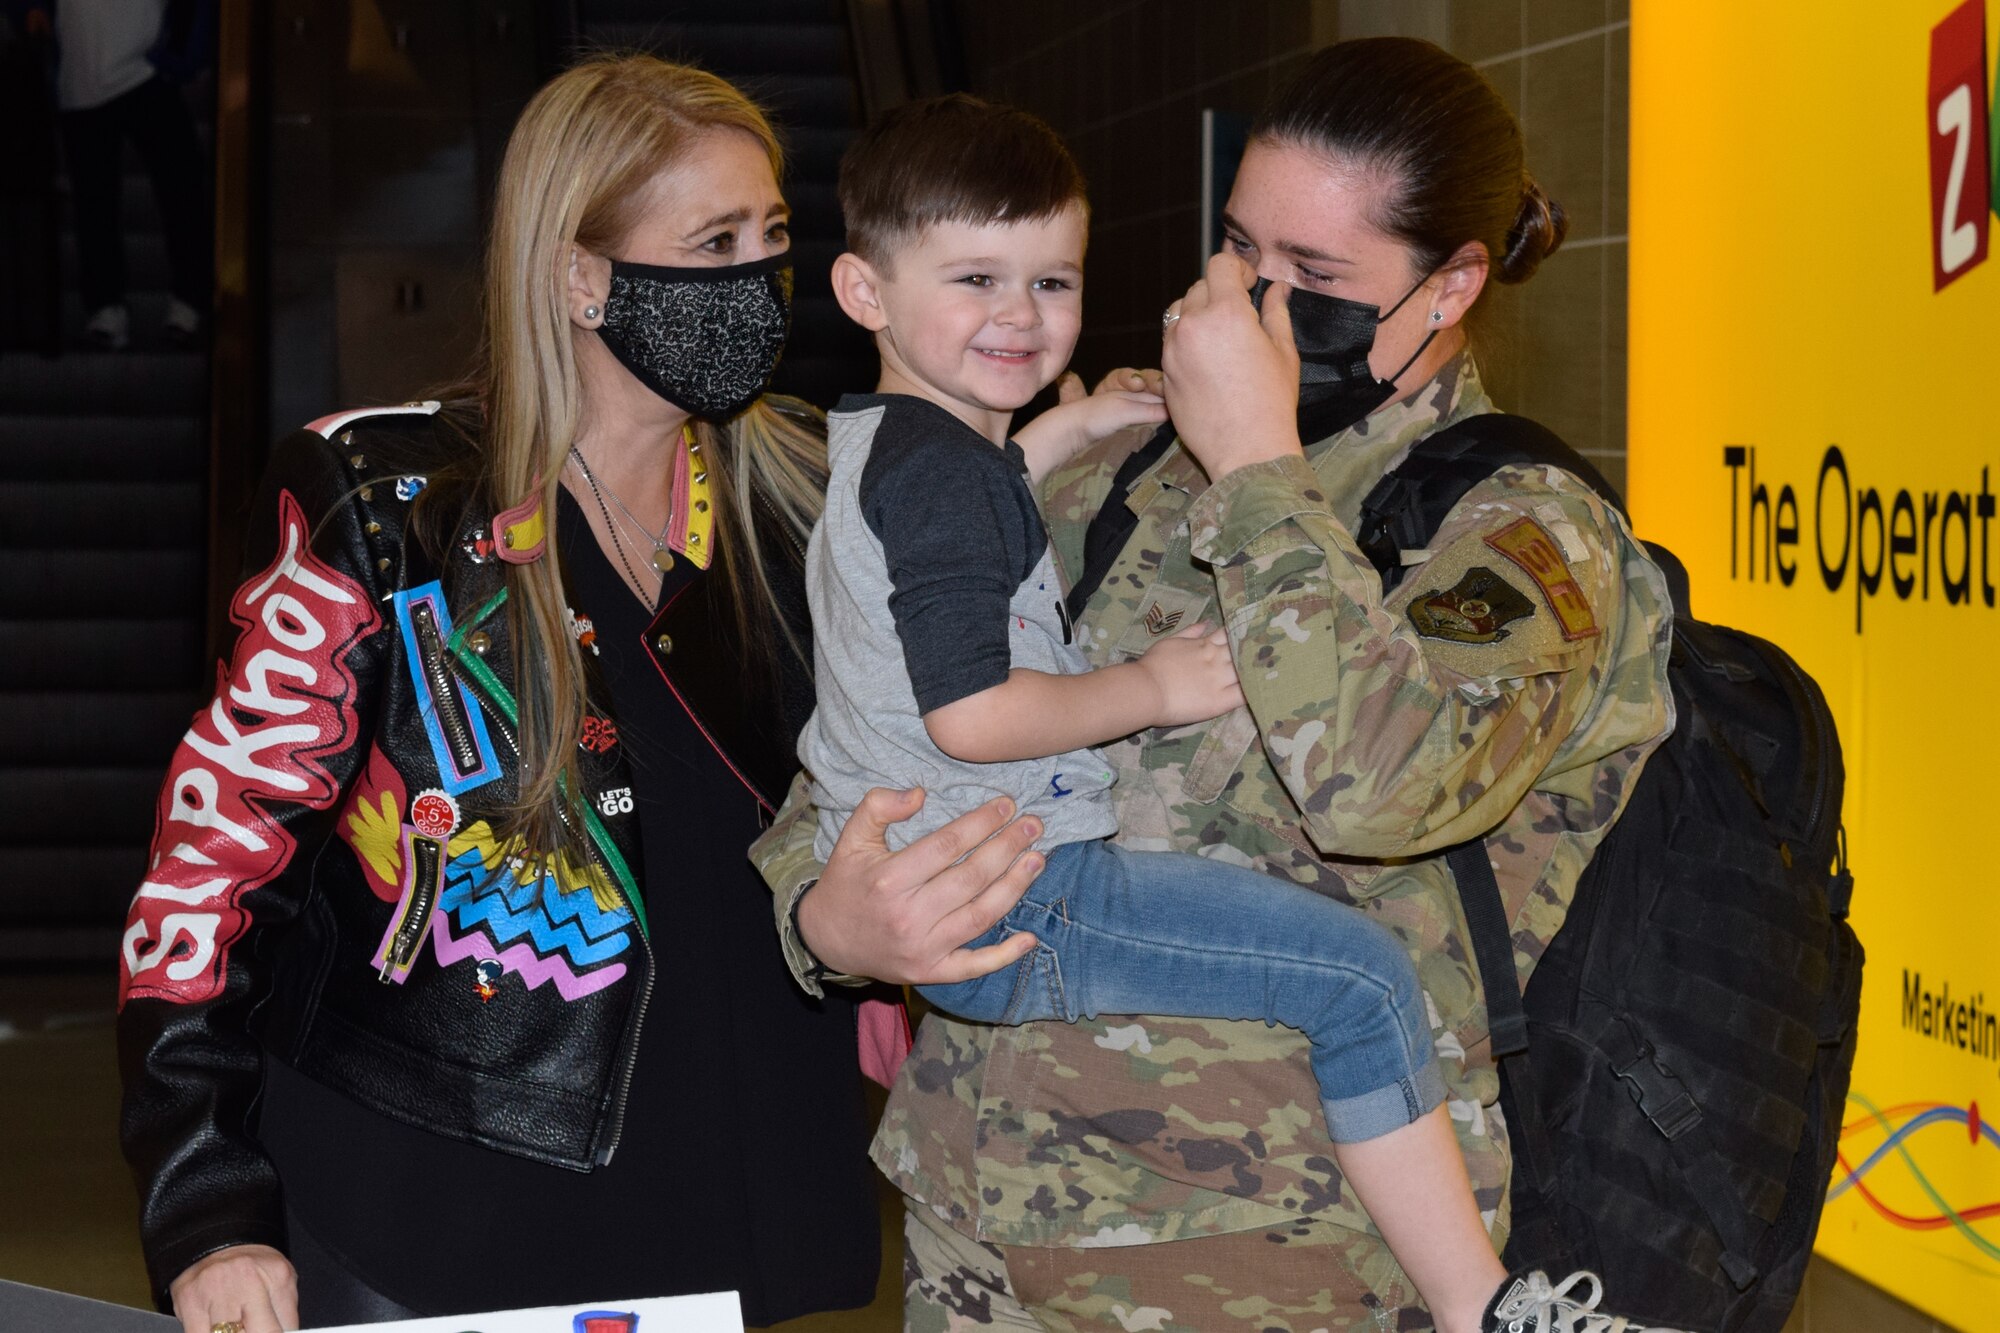 Staff Sgt. Venus Rich, 433rd Security Forces Squadron, reunites with her son, Kyle, and mother, Alicia Rich, at the airport in San Antonio Jan. 31, 2021. The 433rd SFS provided base security during a six-month deployment to Southwest Asia. (U.S. Air Force photo by Airman 1st Class Brittany Wich)